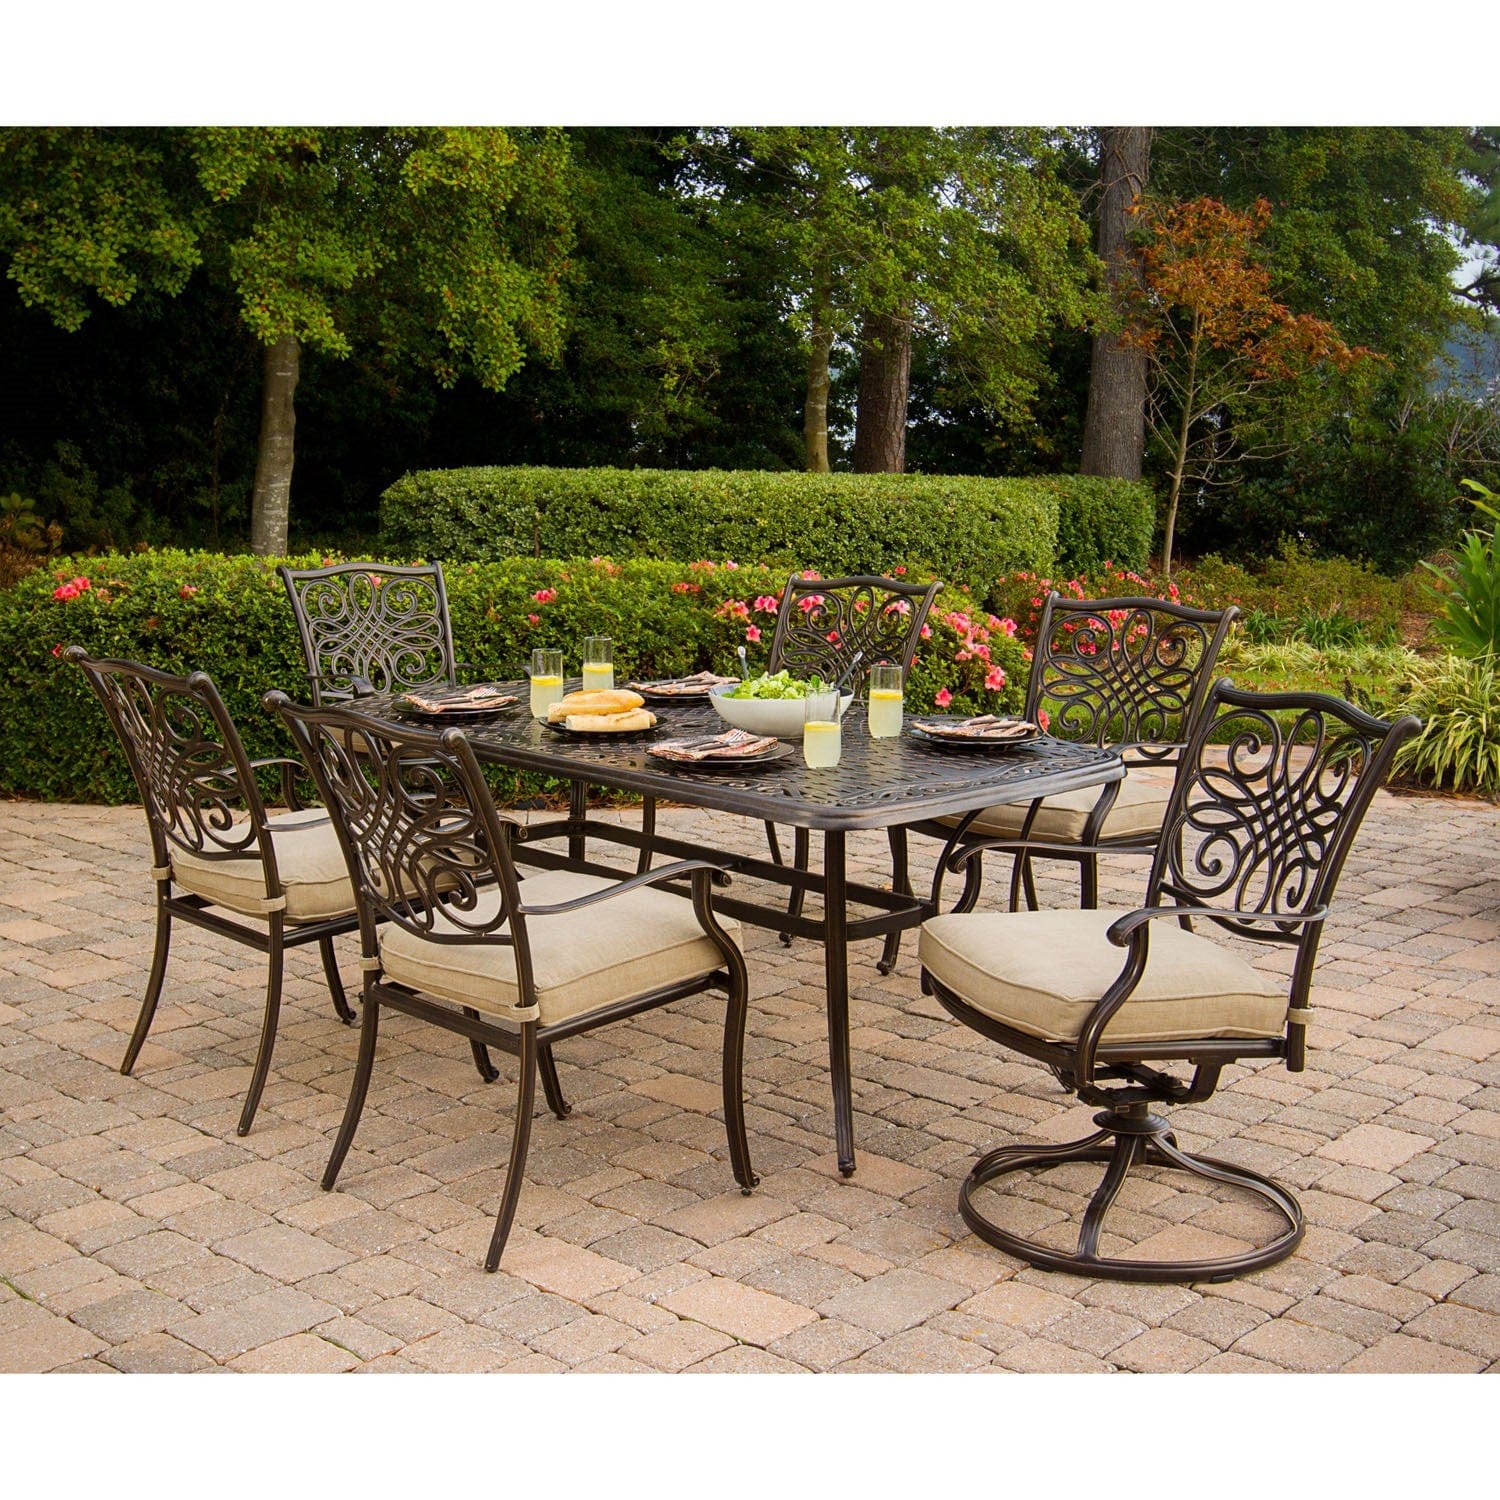 Hanover Outdoor Dining Set Hanover Traditions 7-Piece Aluminium Frame Outdoor Dining Set of Four Dining Chairs, Two Swivel Chairs and a 38 x 72 in. Table | TRADITIONS7PCSW